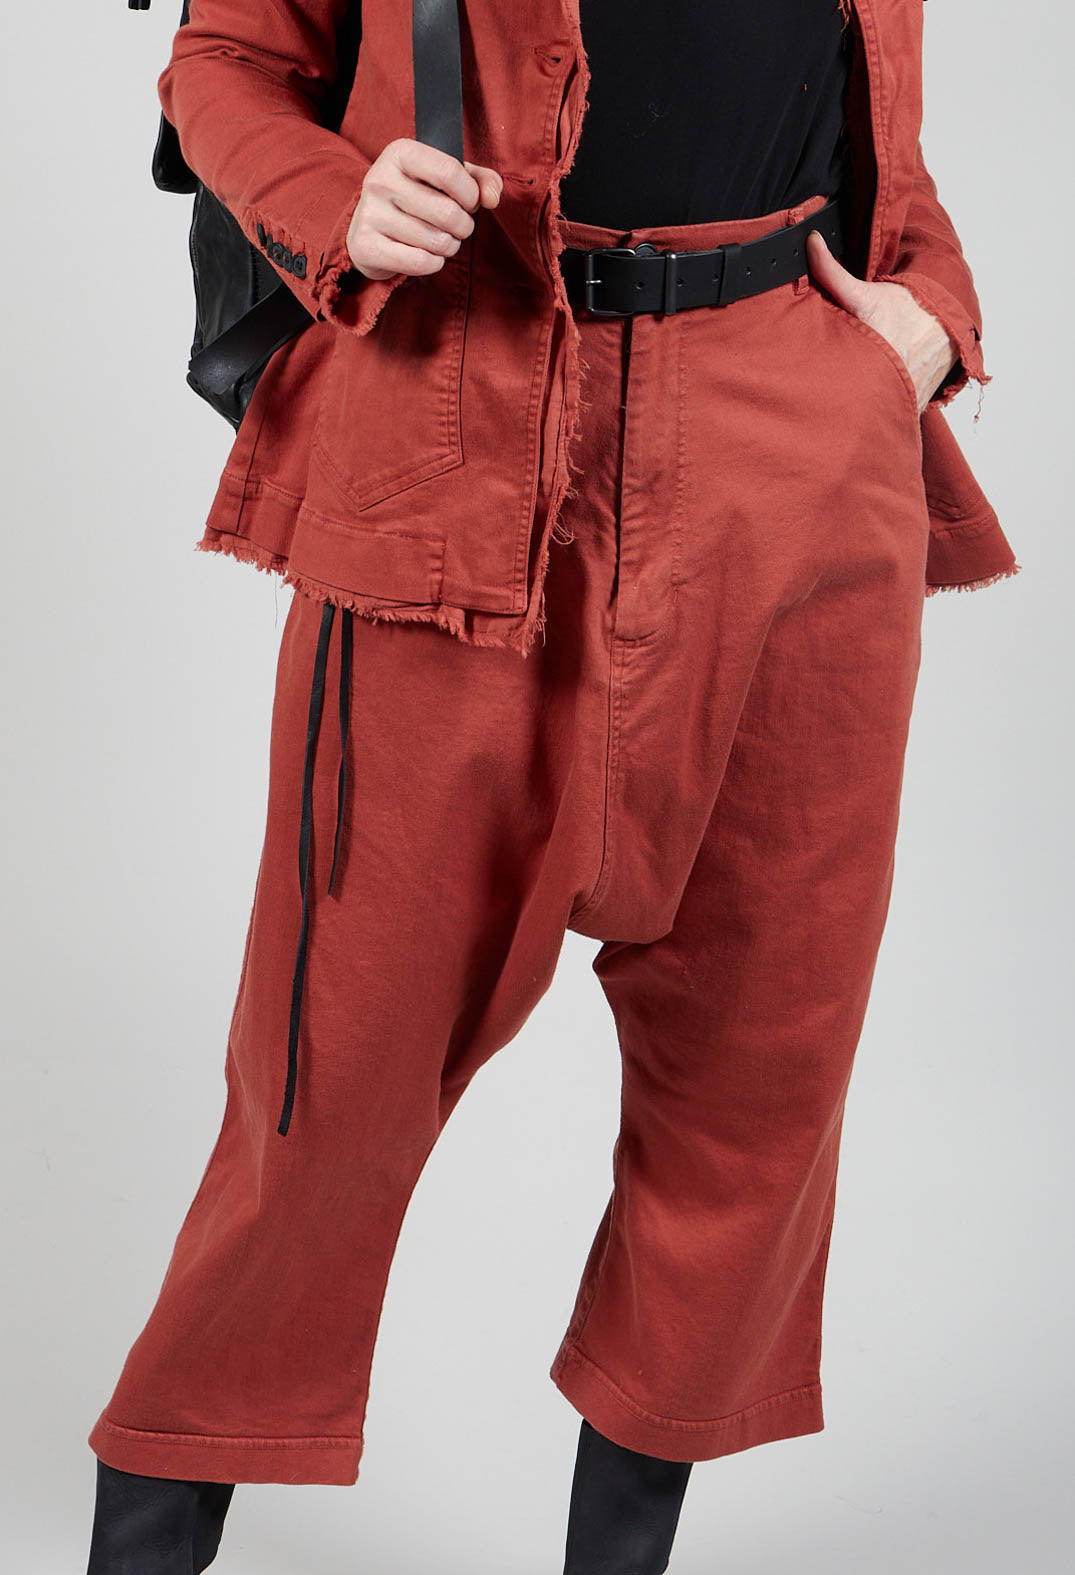 Hang Loose Trousers in Picante